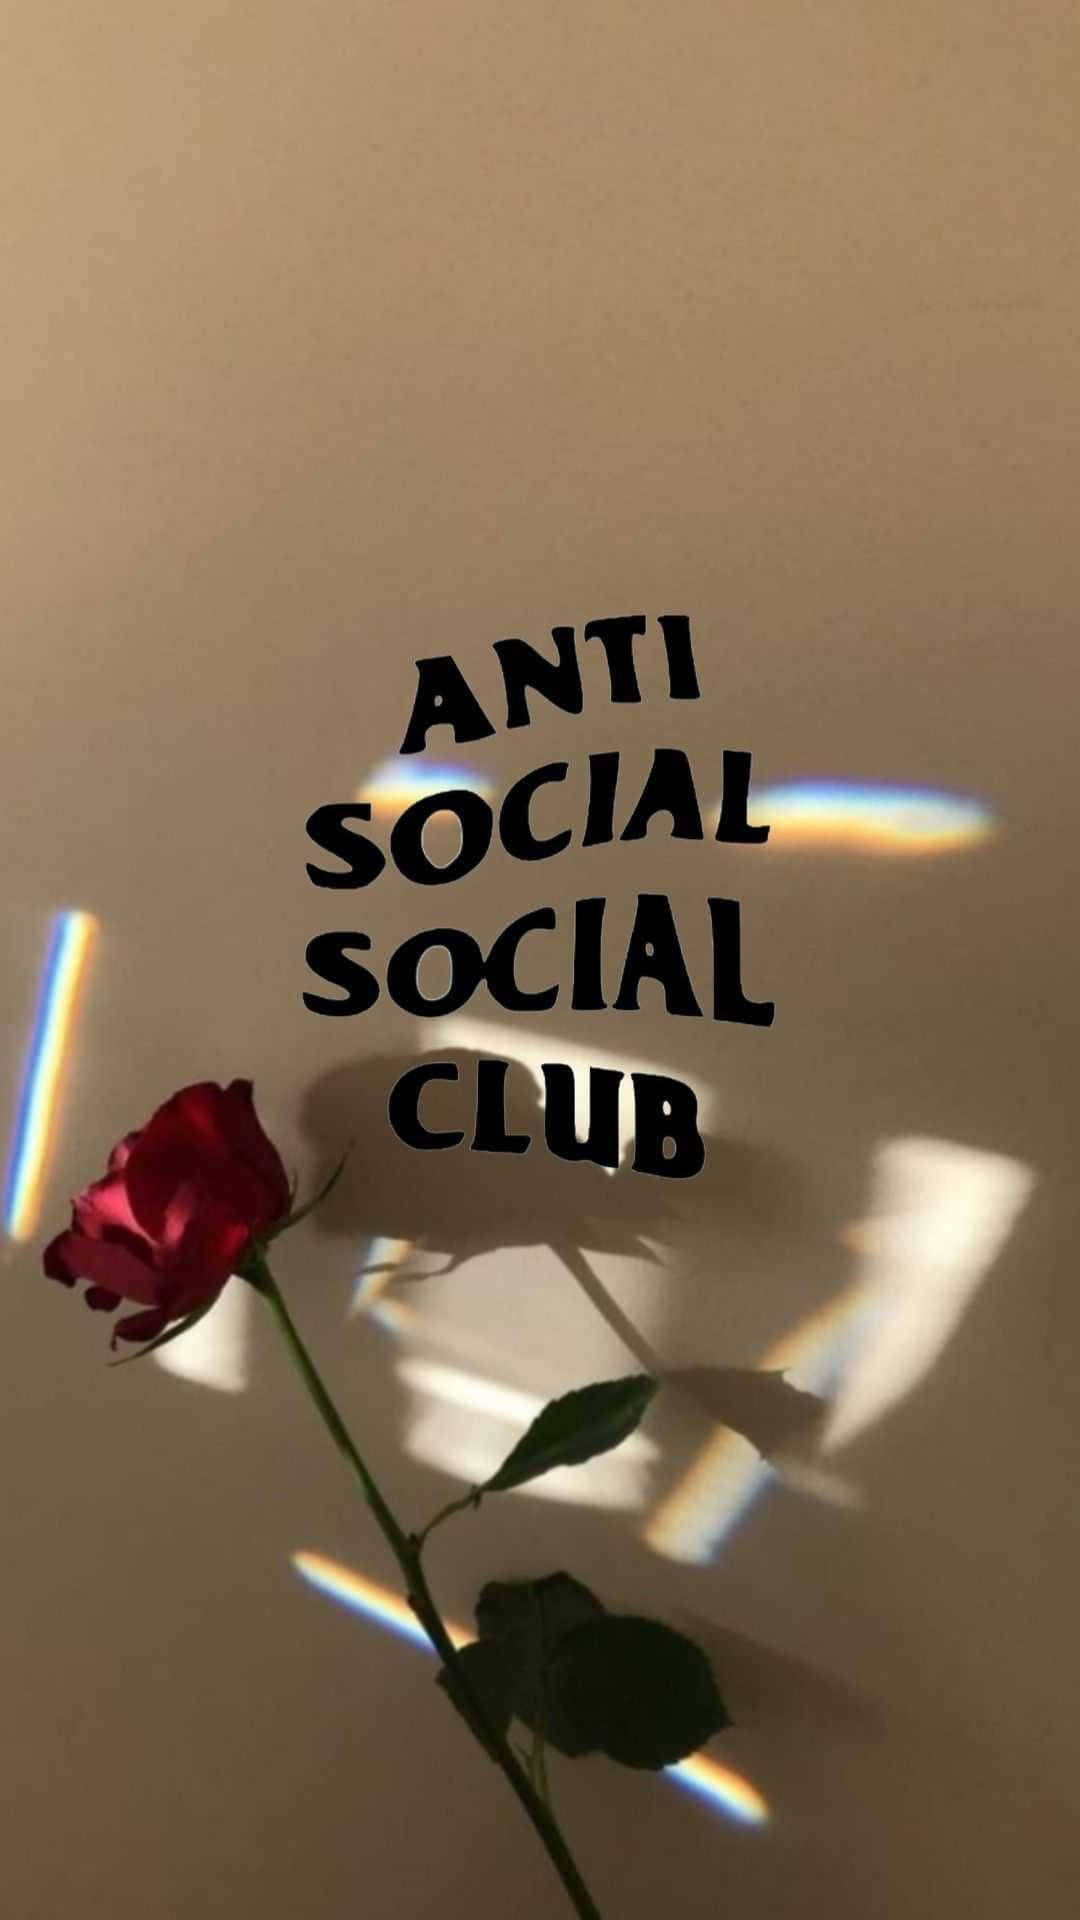 Download Red Rose And Anti Social Club Iphone Wallpaper | Wallpapers.com